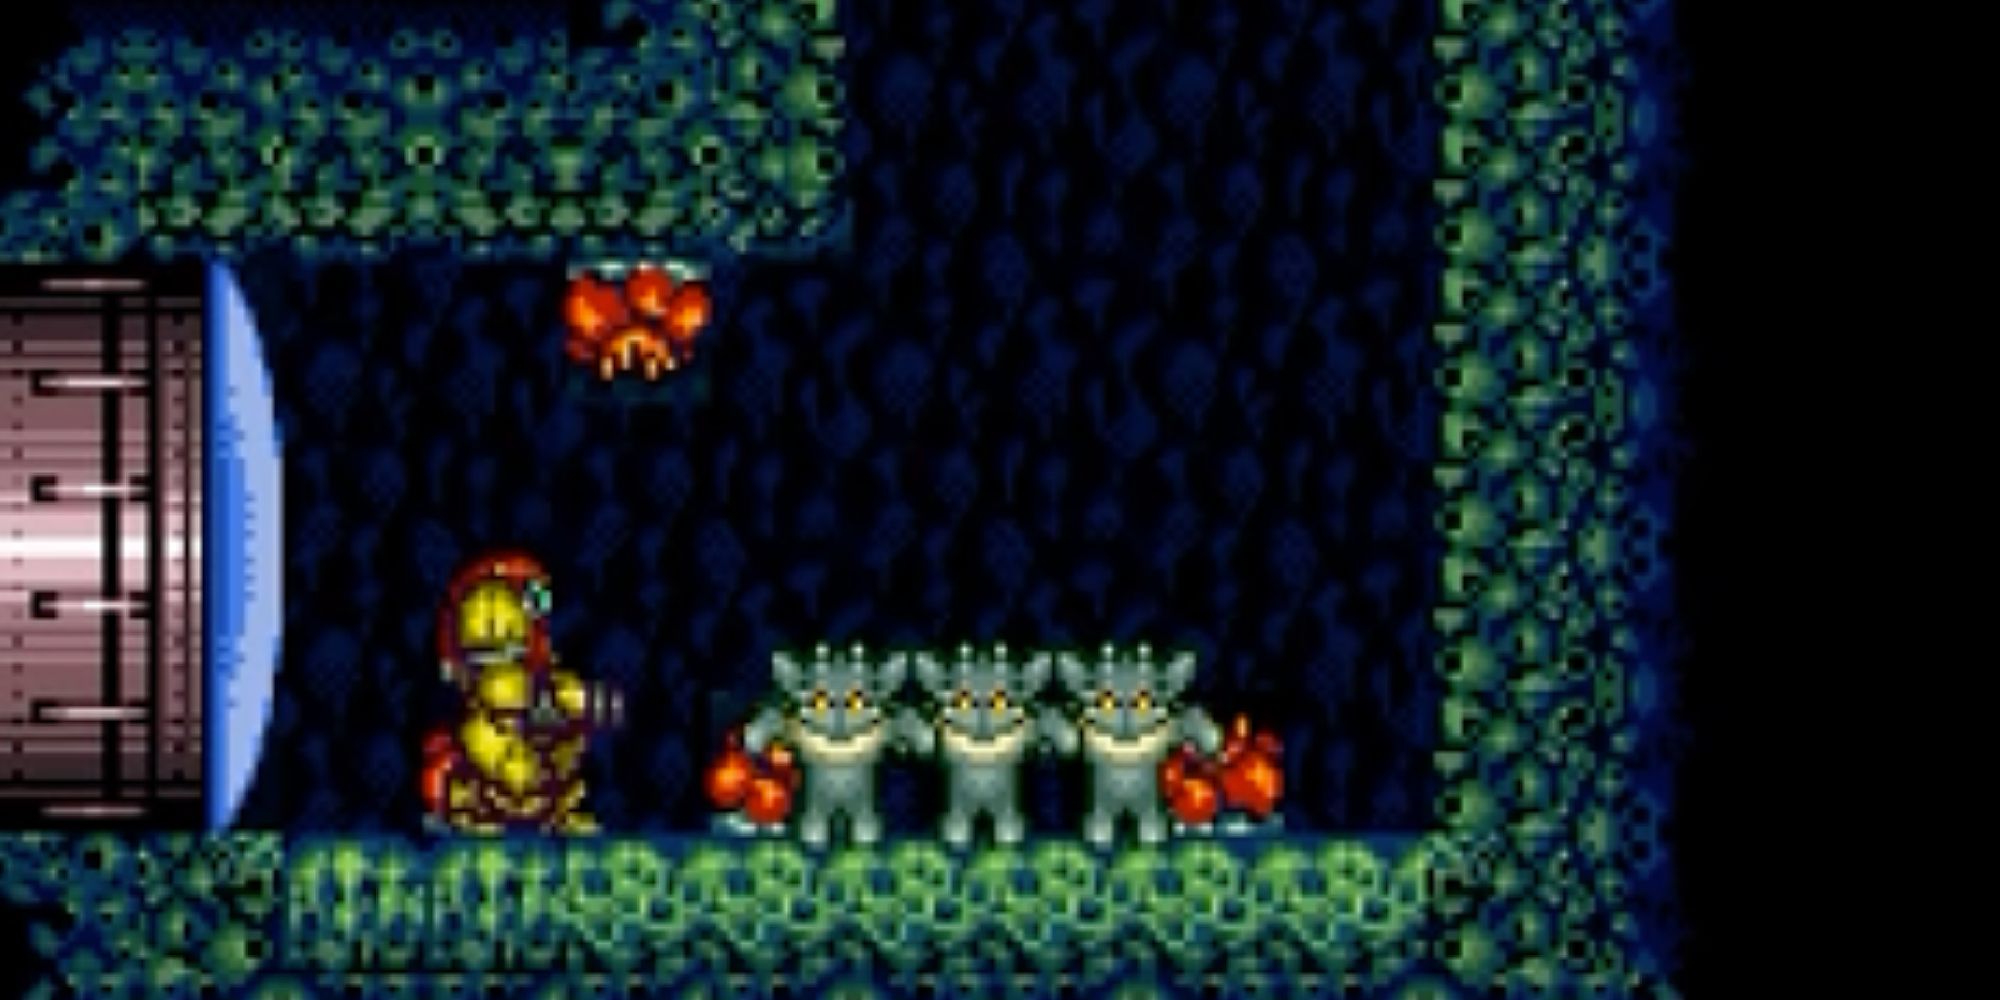 Samus enters the wall-jumping room in Super Metroid, where three small creatures teach her how to wall-jump.